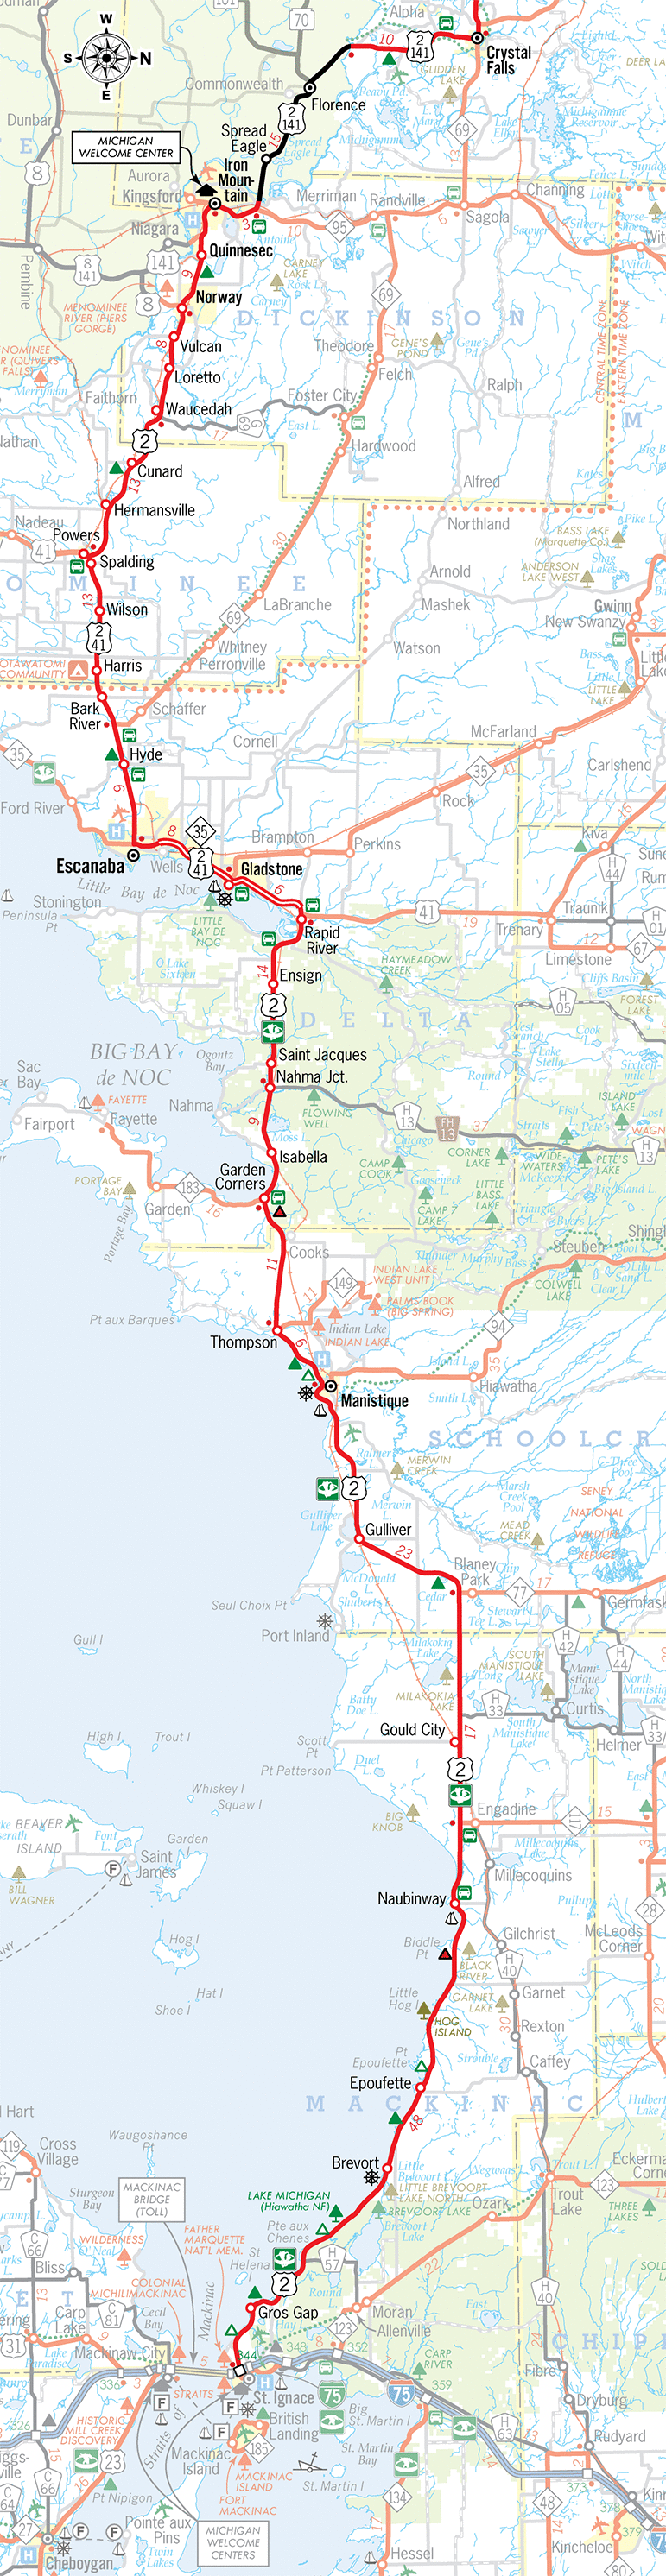 US-2 Route Map, East Portion